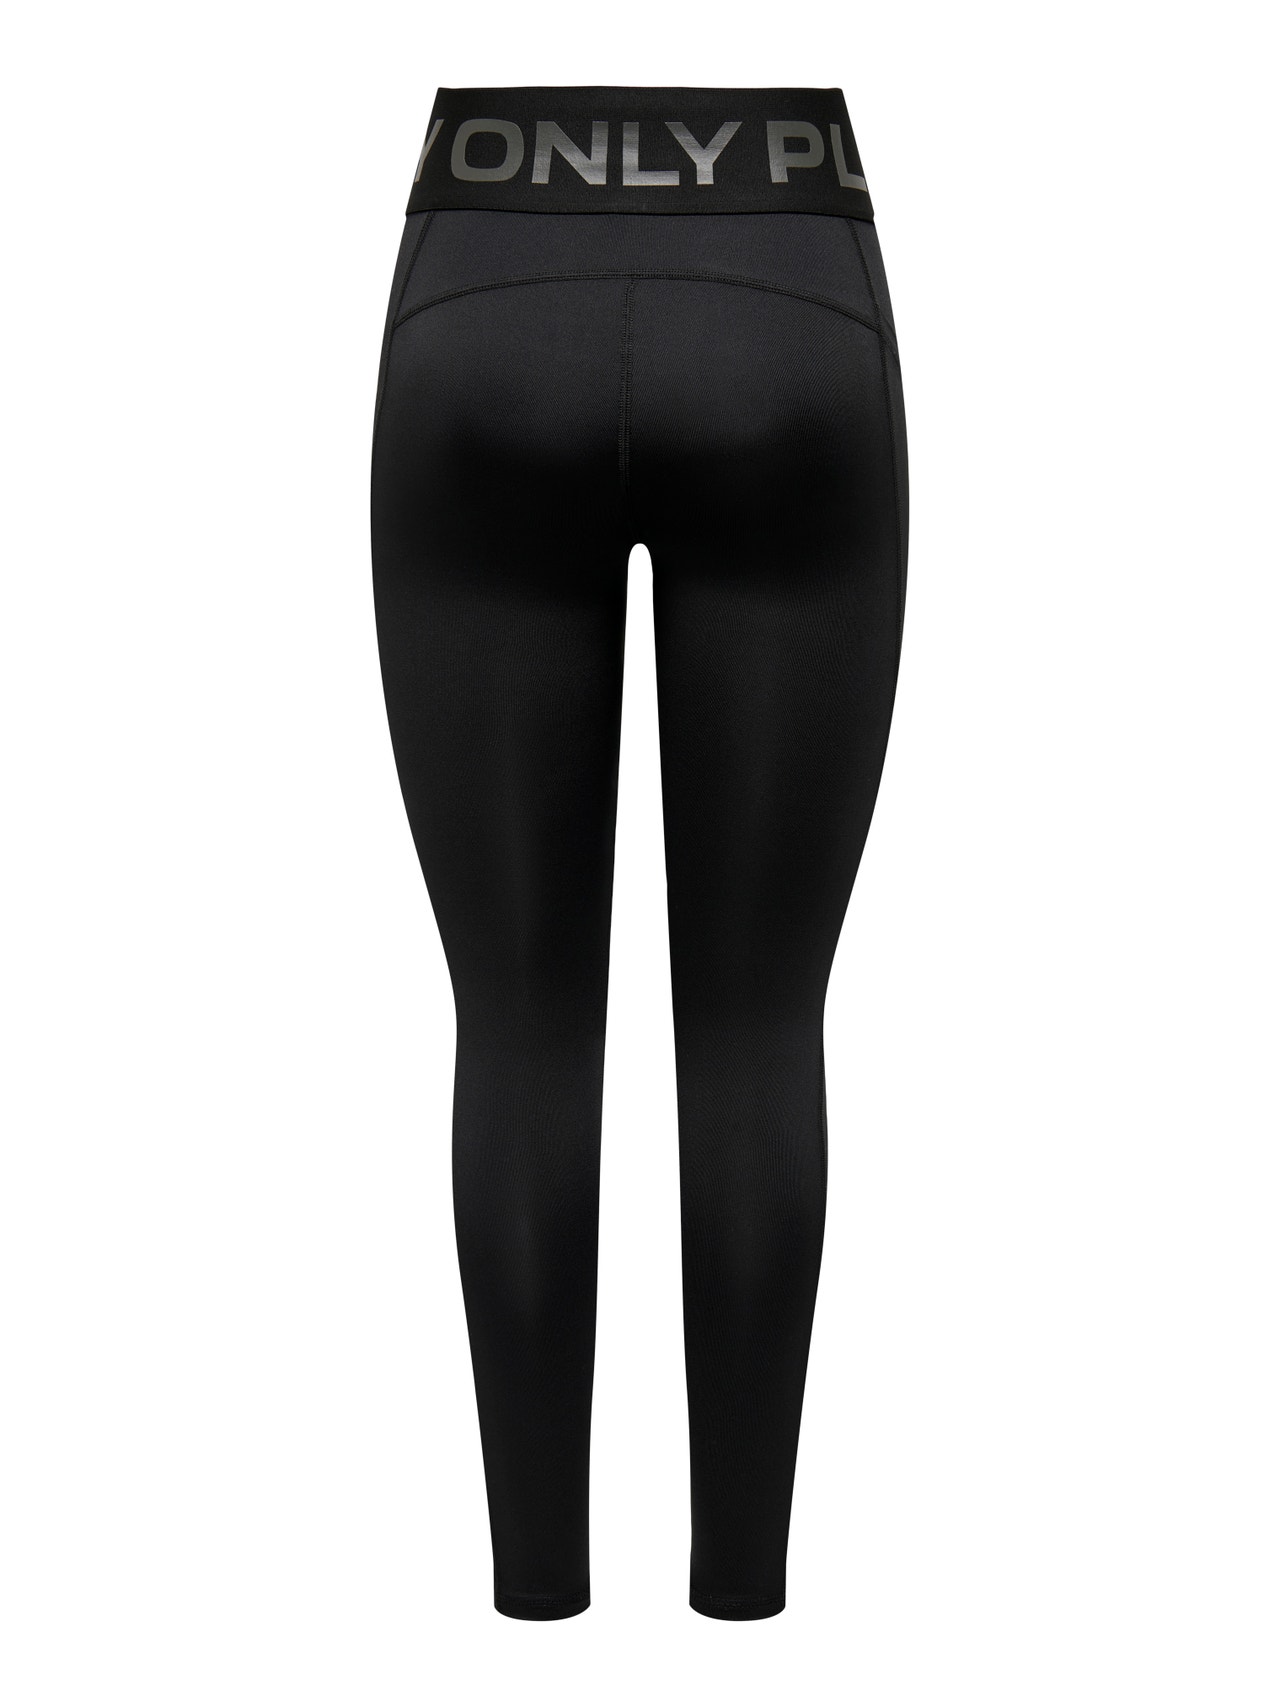 ONLY High waist training tights -Black - 15295194